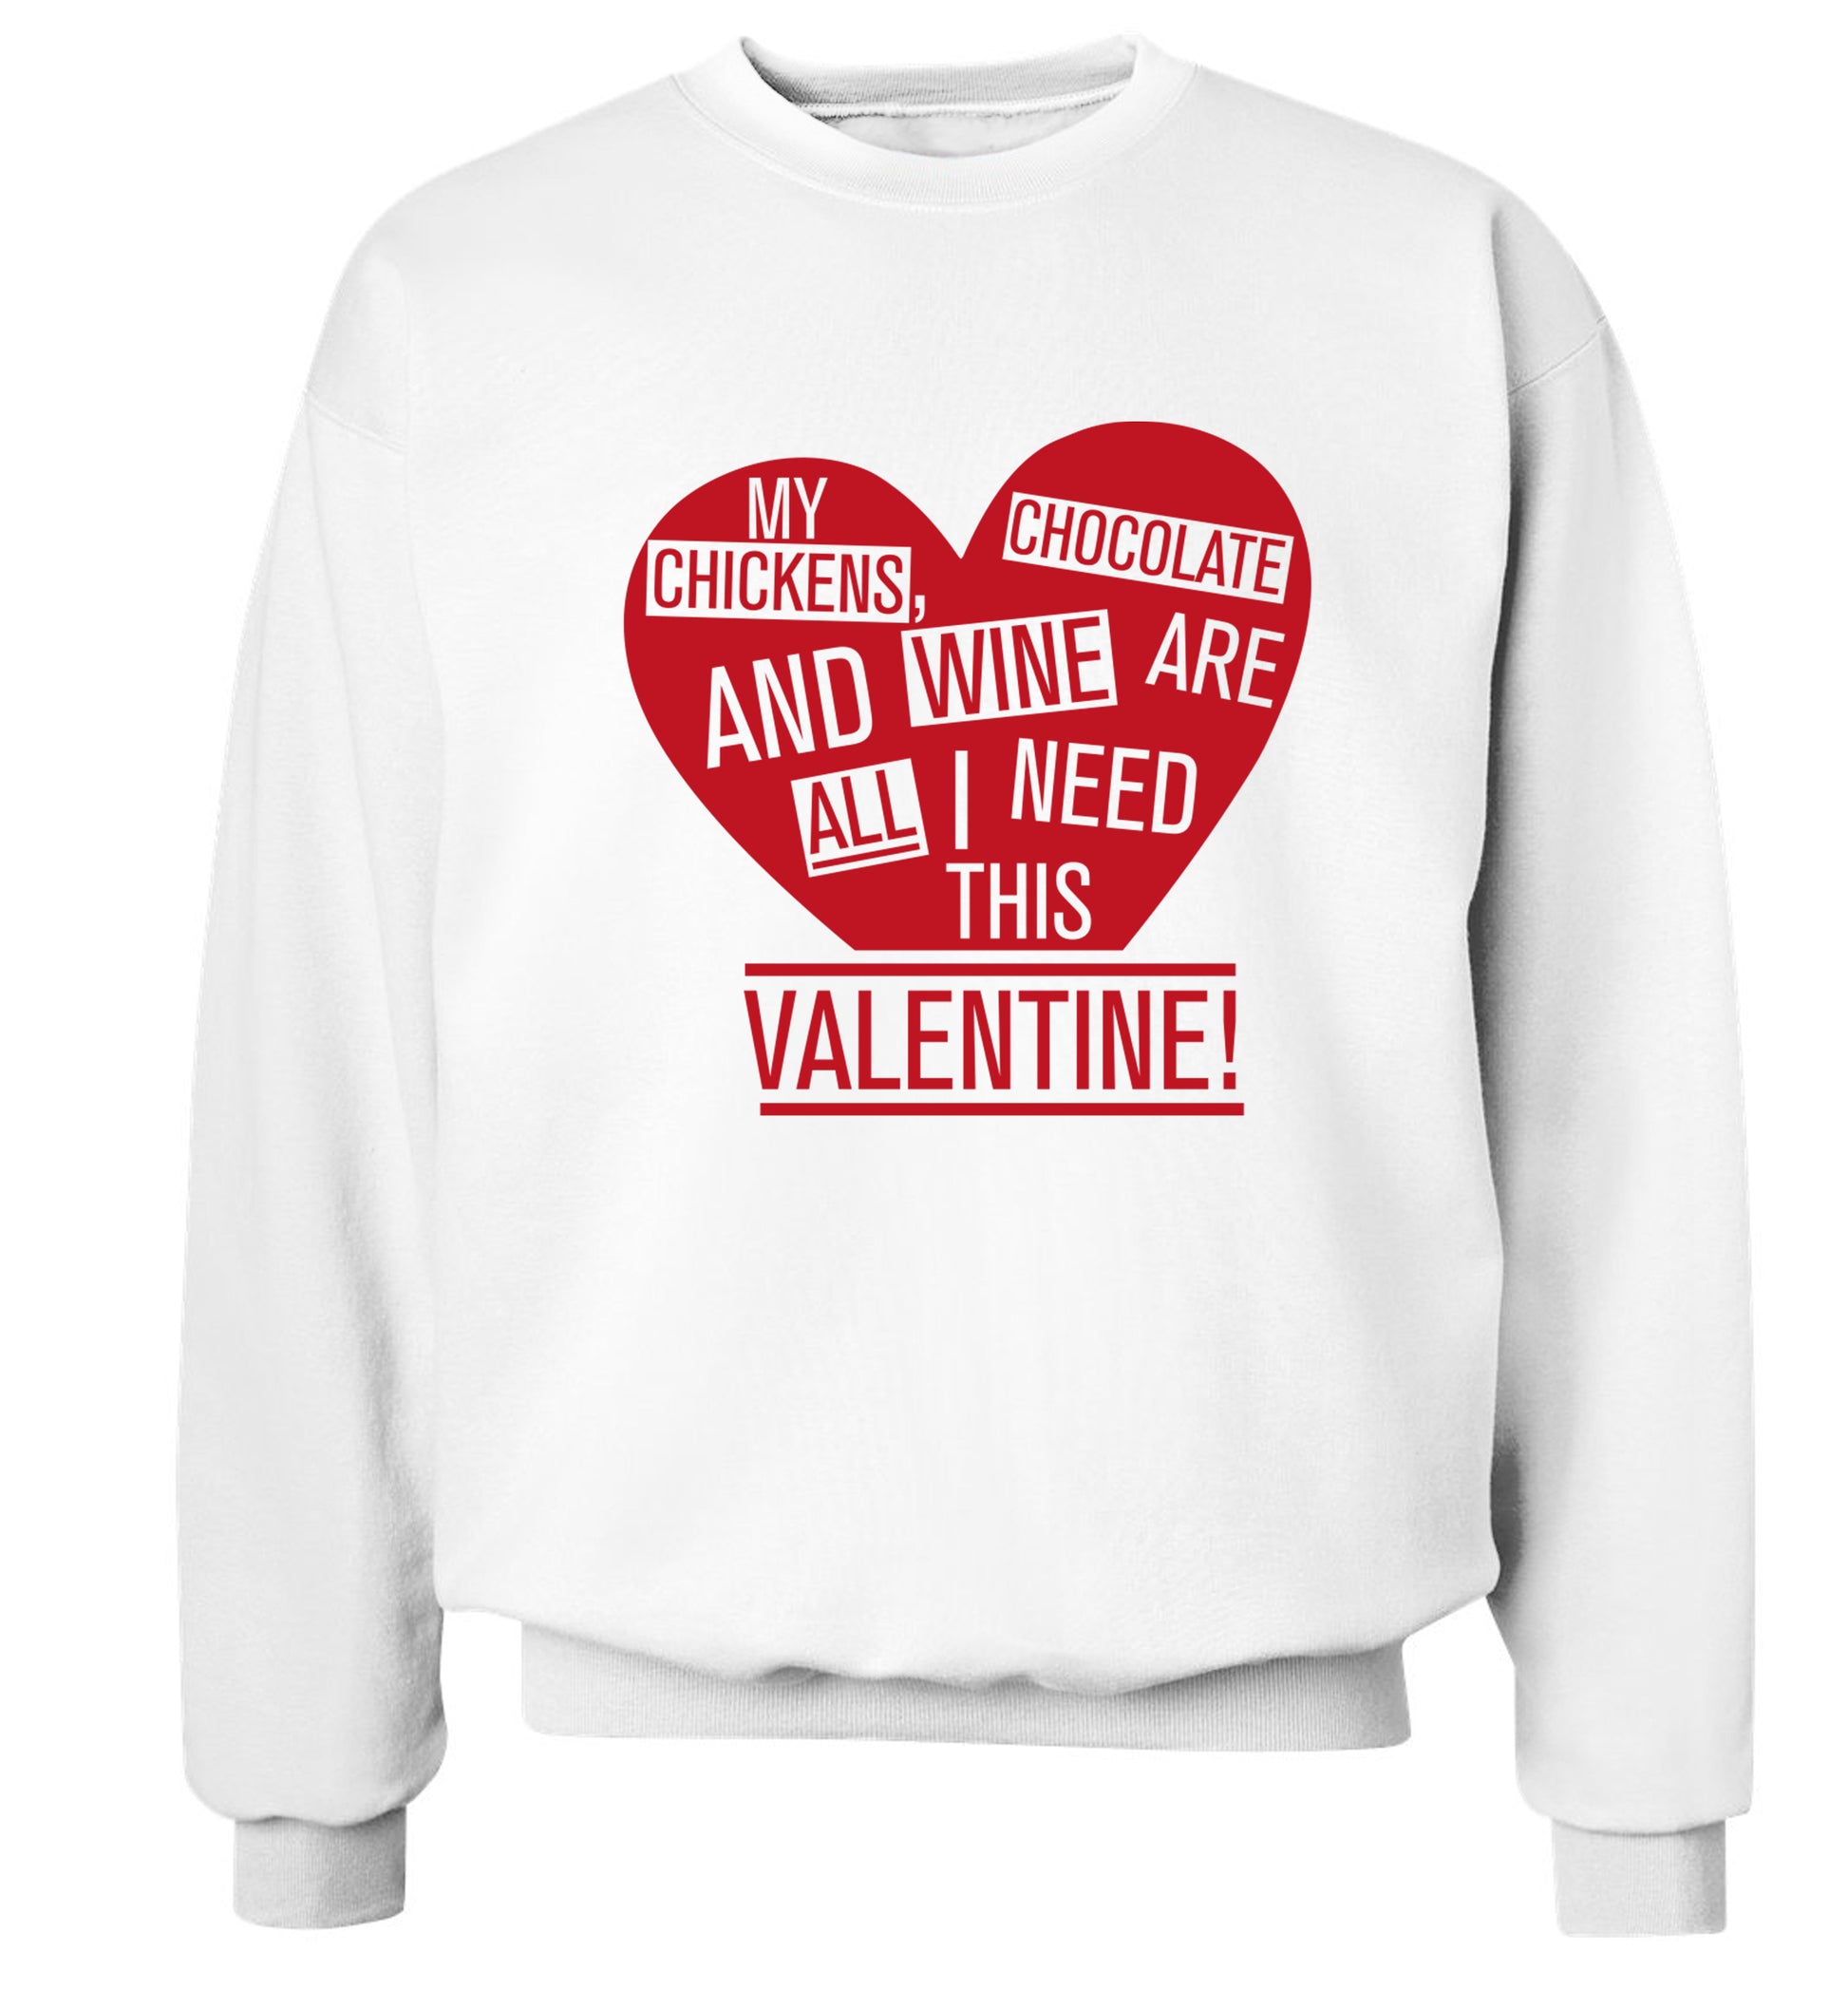 My chickens, chocolate and wine are all I need this valentine! Adult's unisex white Sweater 2XL